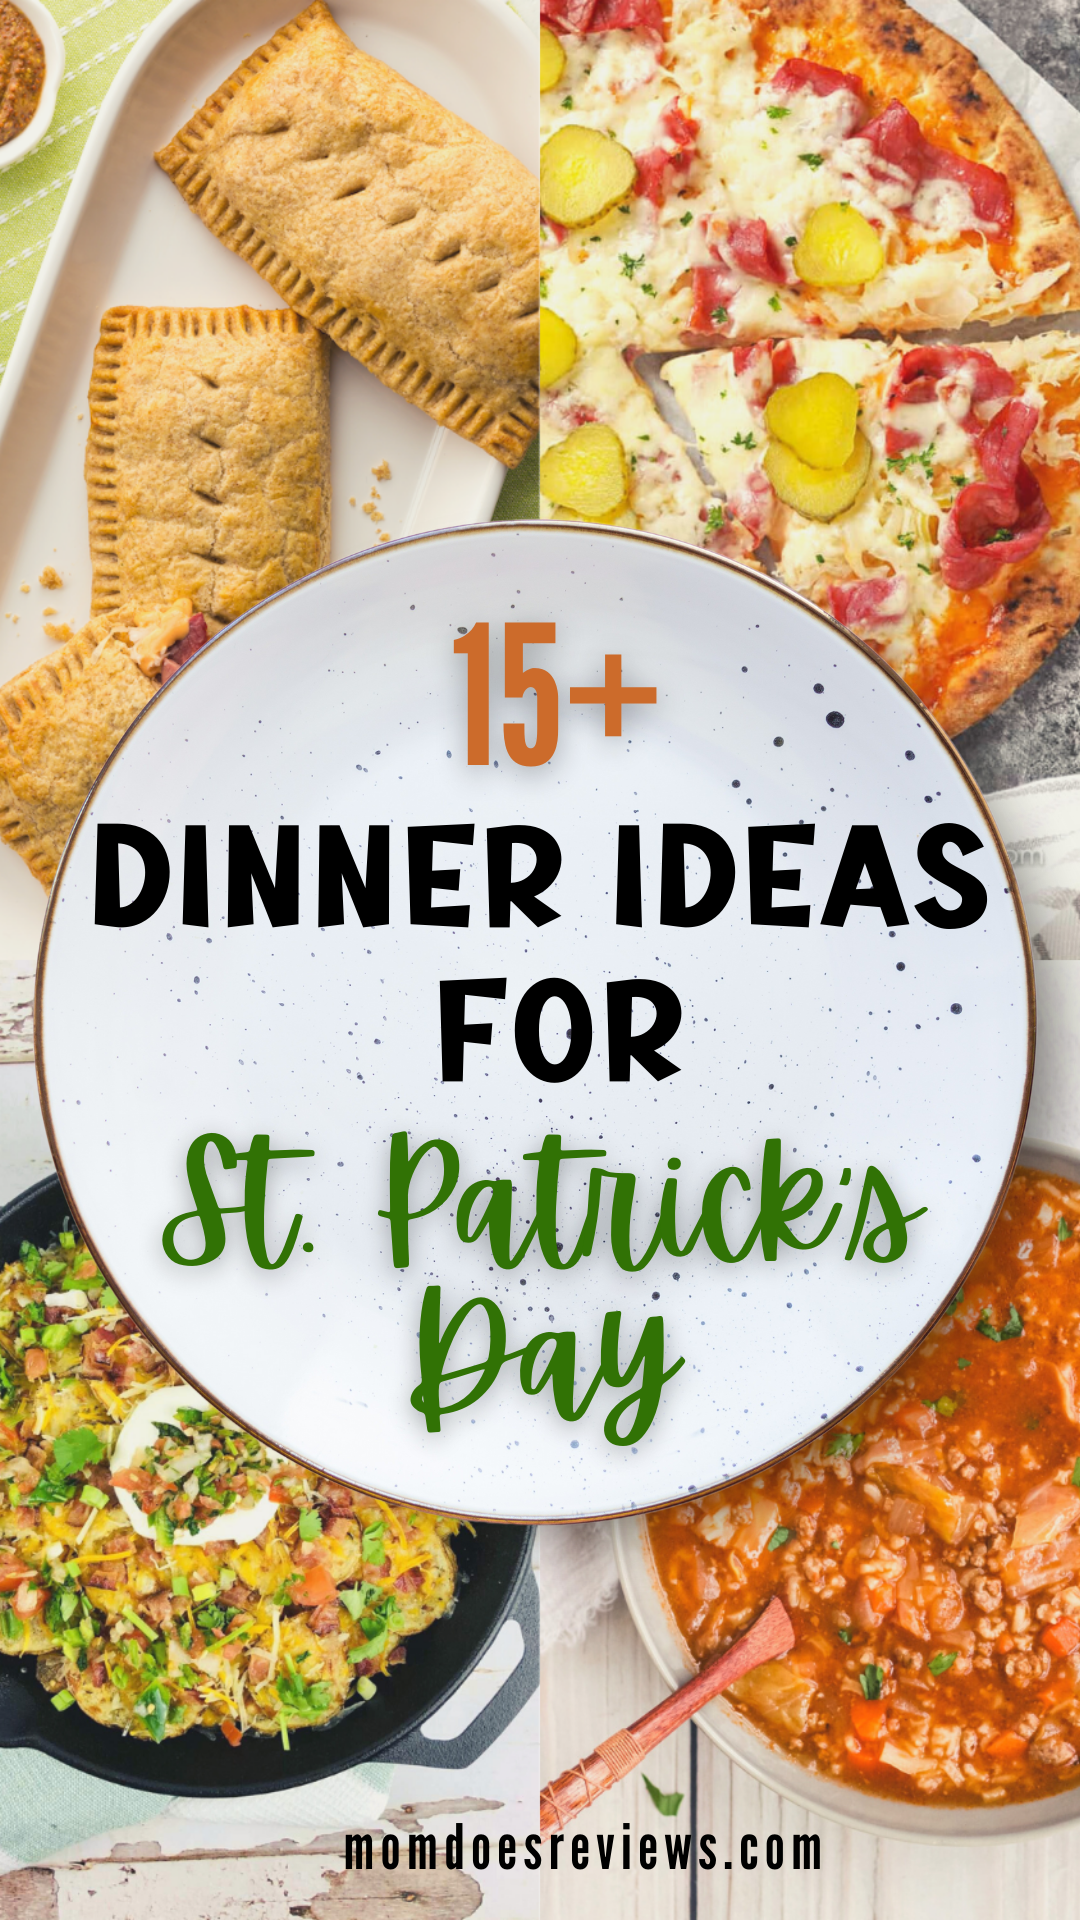 Over 15 Dinner Ideas for St. Patrick's Day 